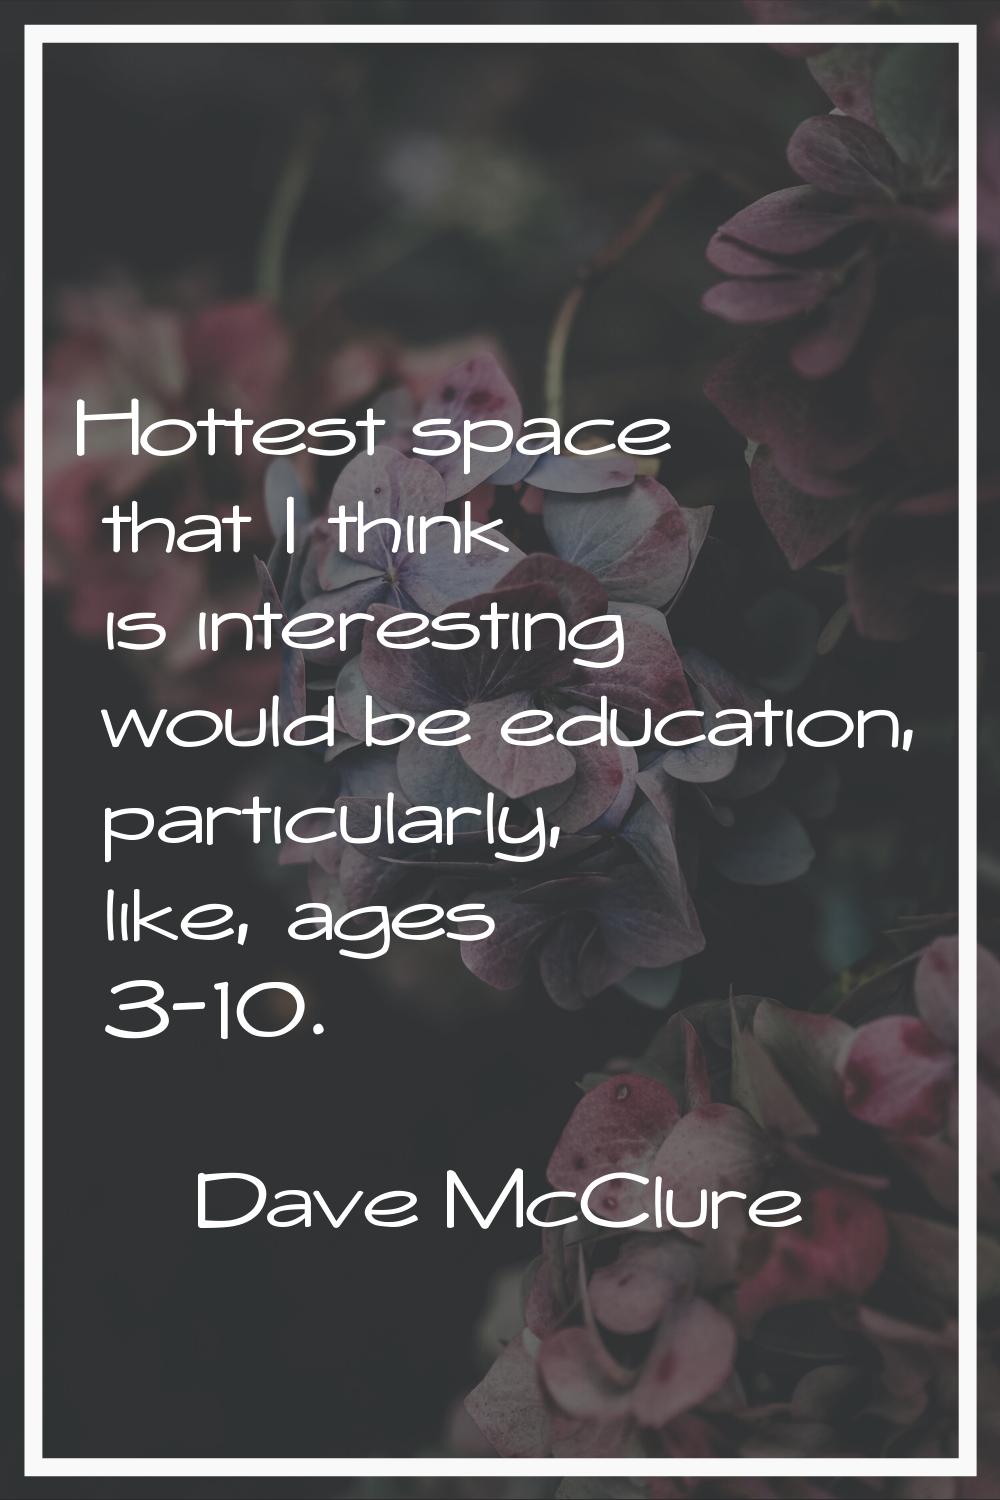 Hottest space that I think is interesting would be education, particularly, like, ages 3-10.